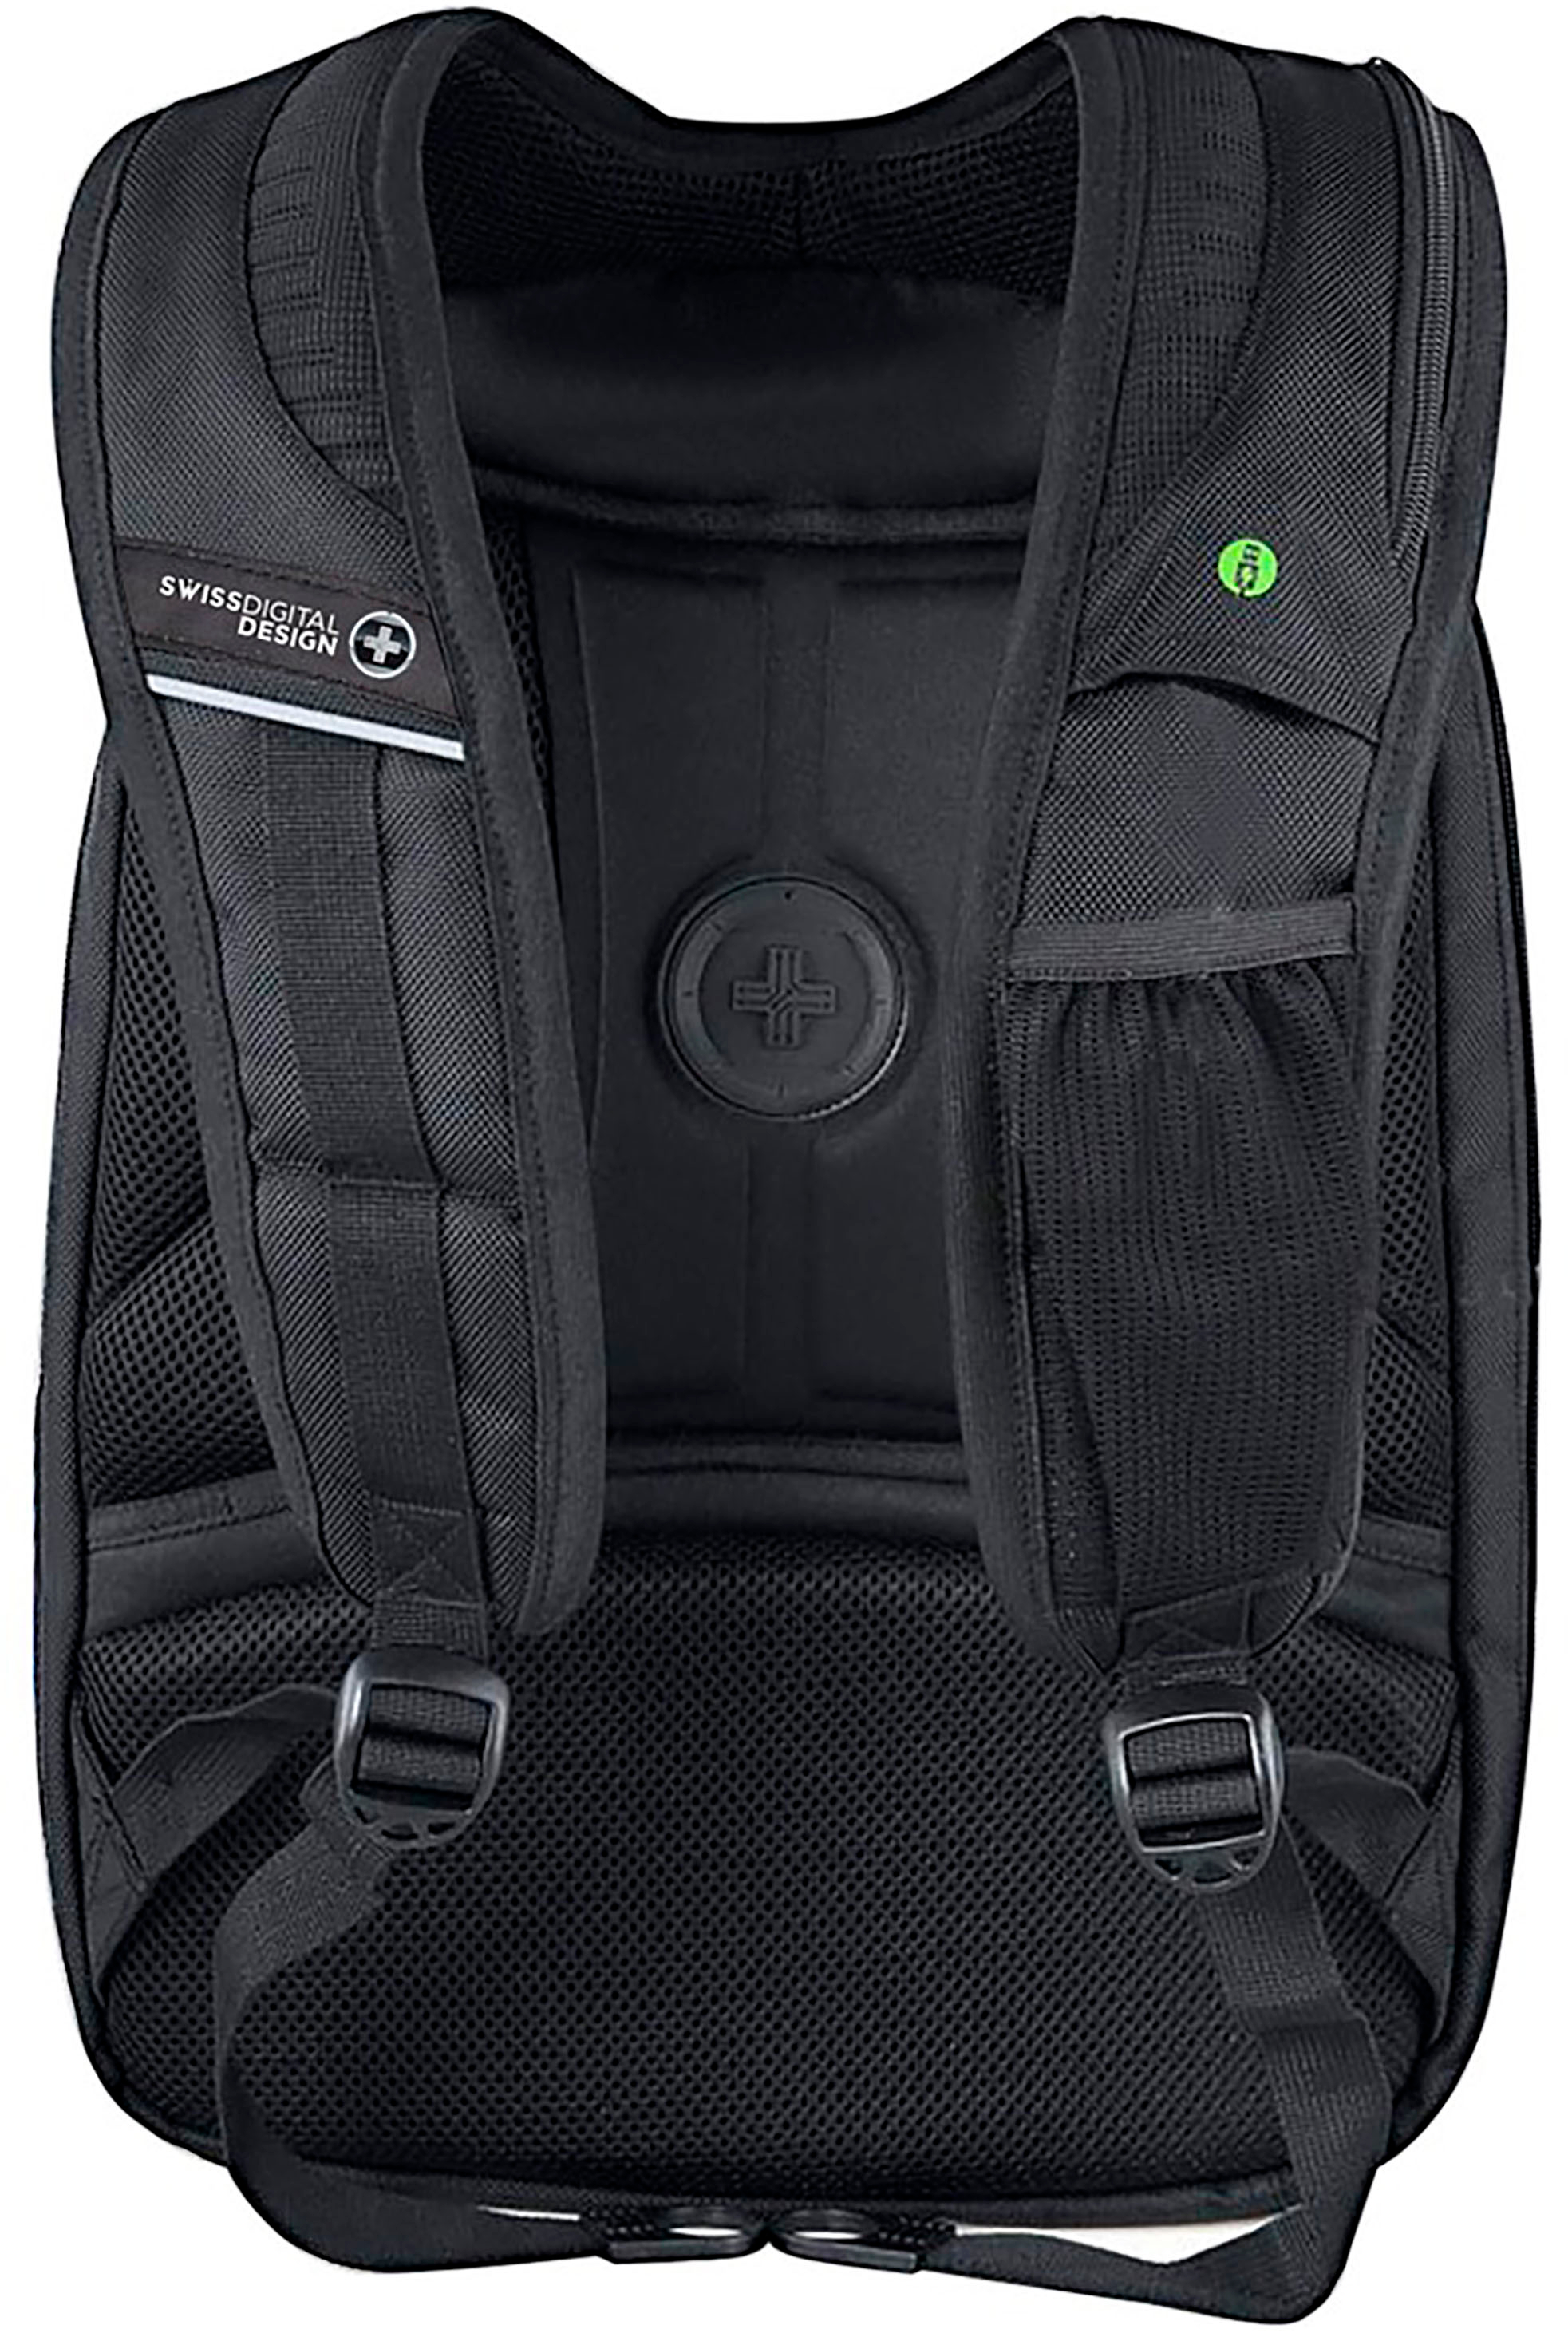 Back View: Swissdigital Design - Terabyte TSA-friendly Backpack with USB Charging port/RFID protection and fits up to 15.6" laptop - Black